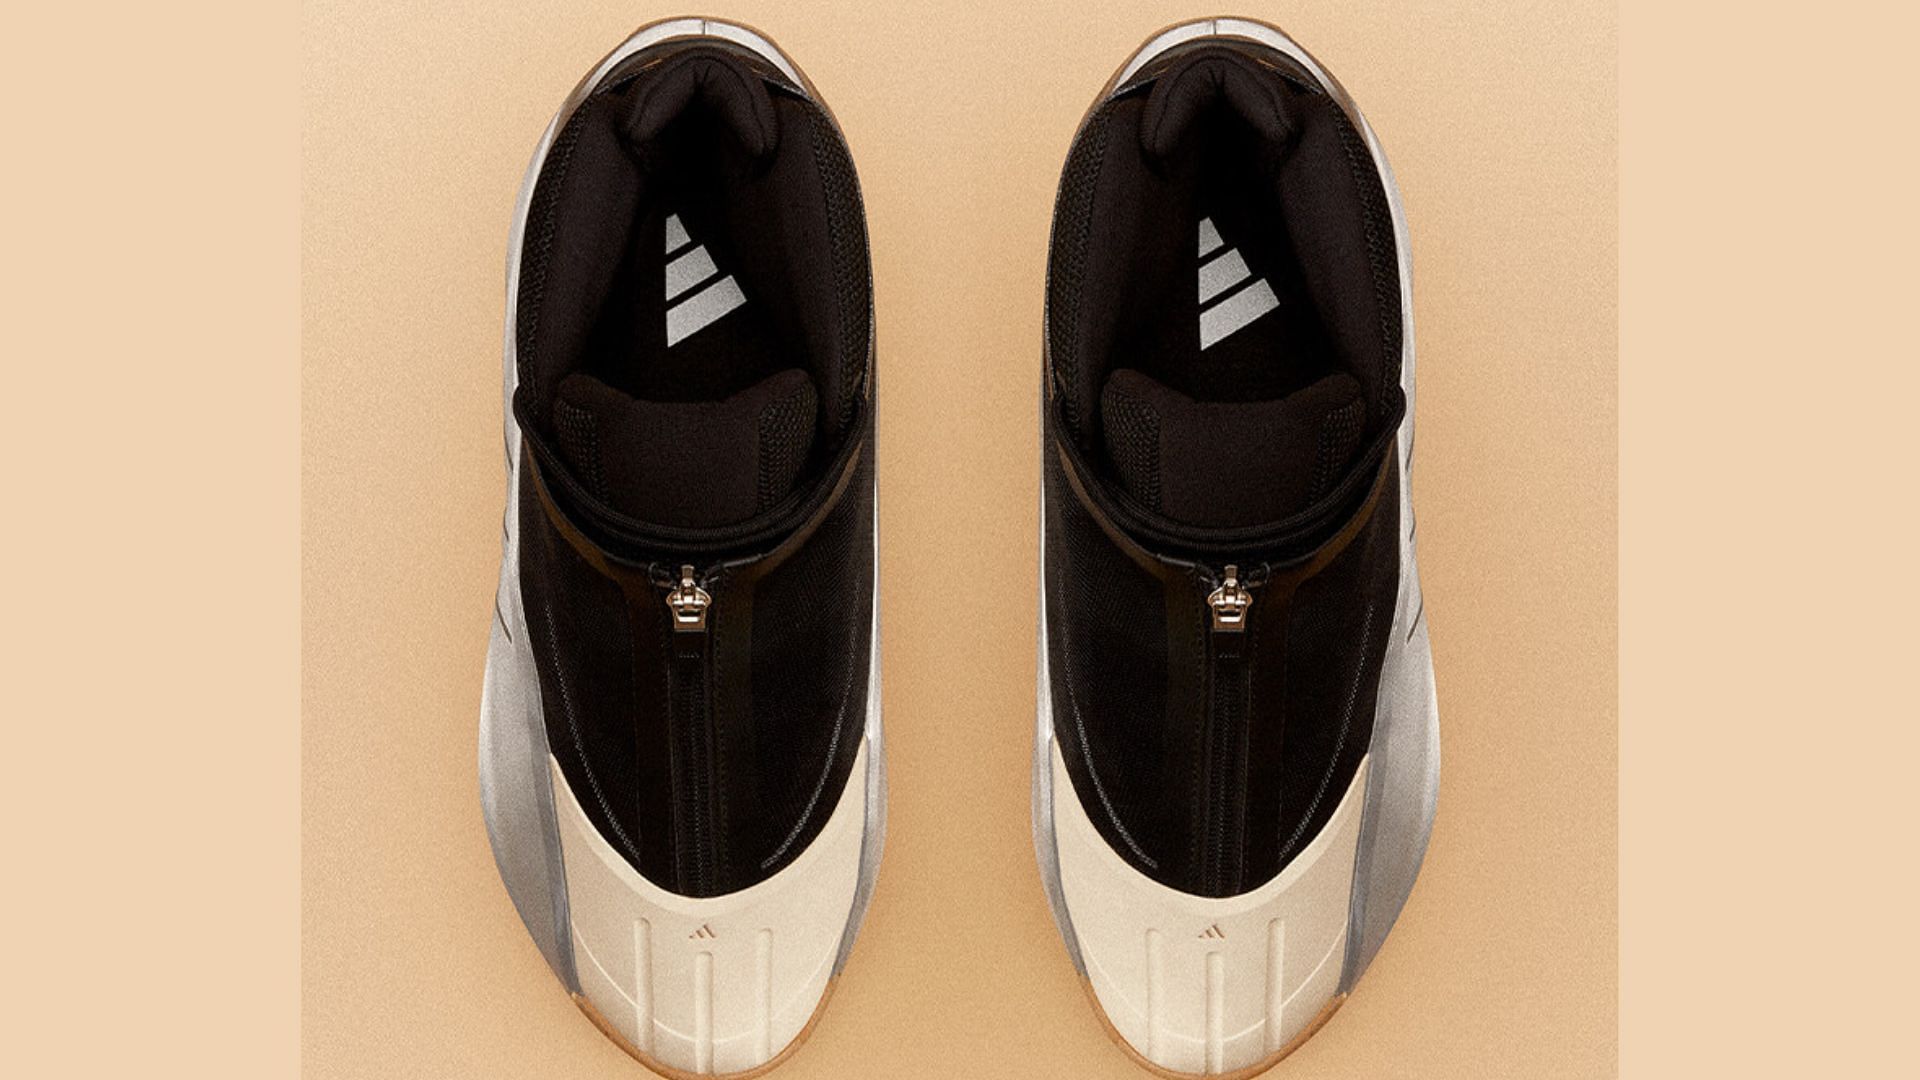 Take a closer look at the uppers of the sneaker (Image via Adidas)